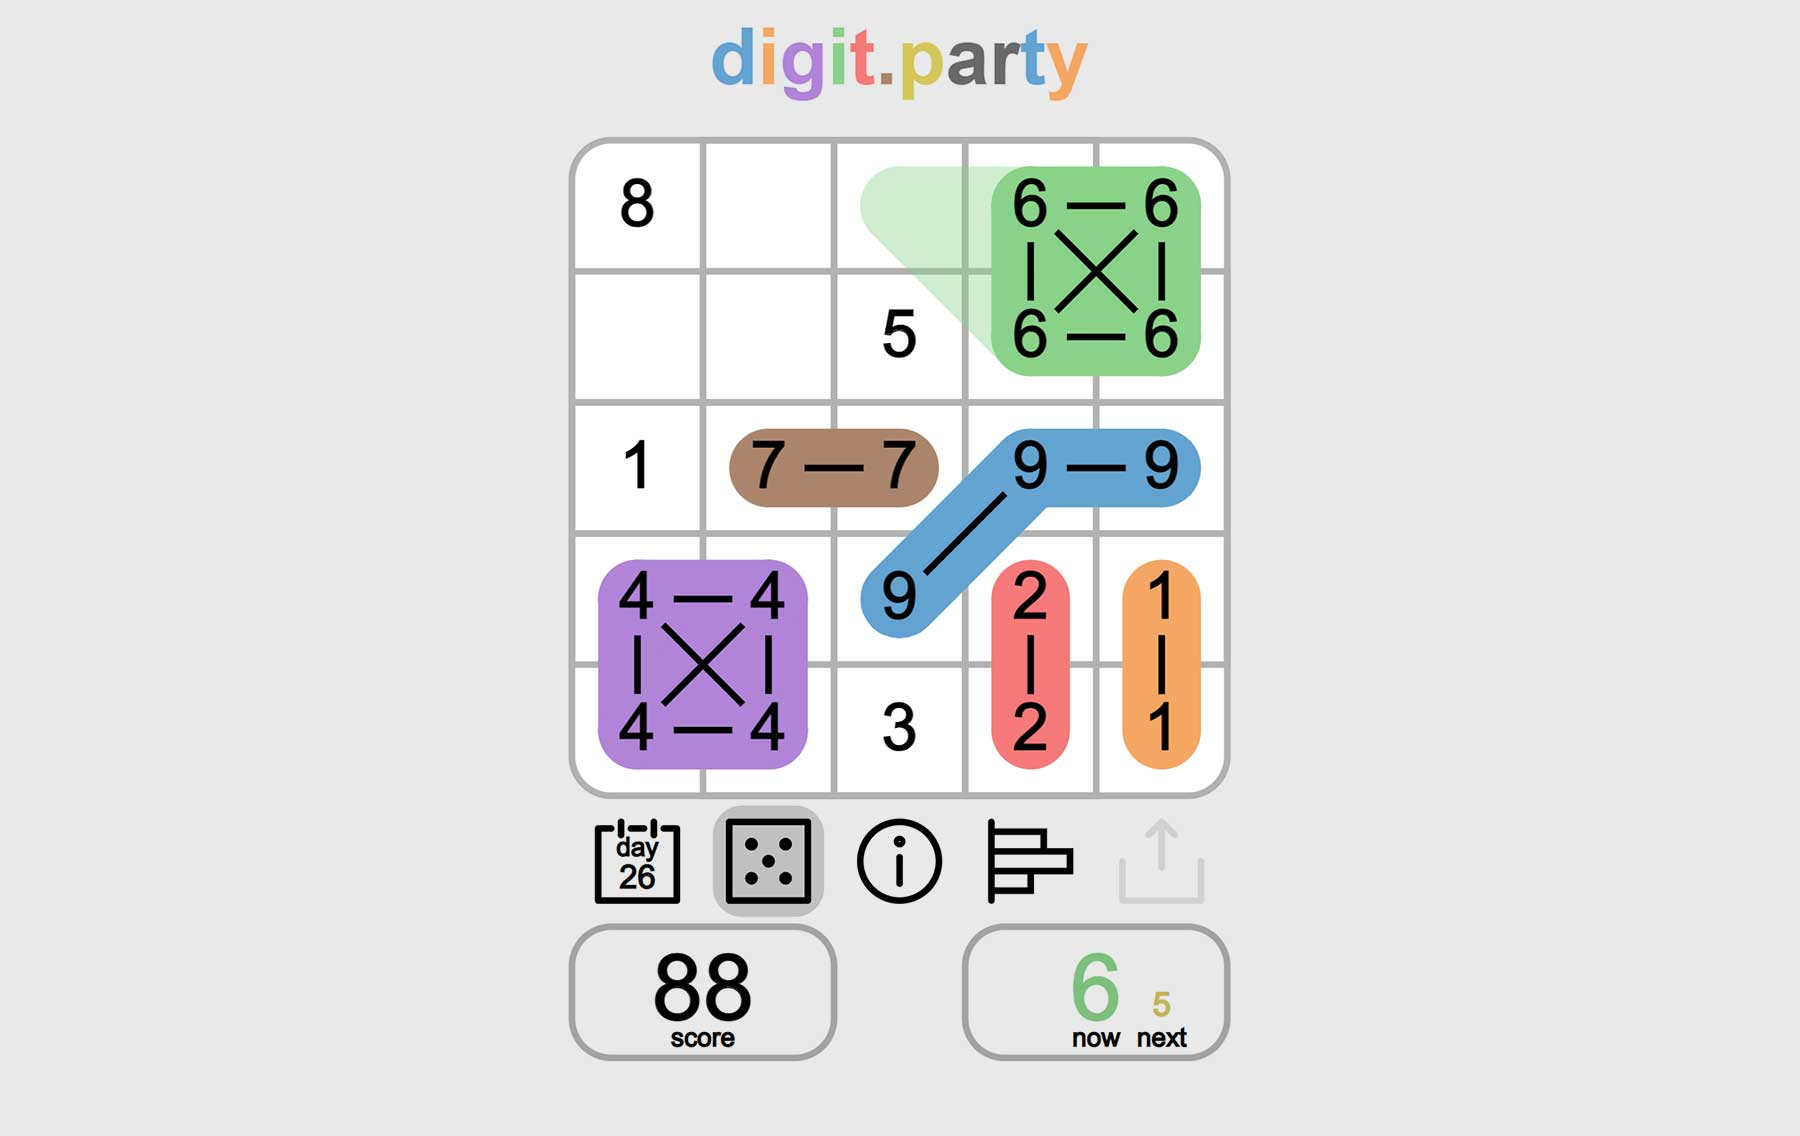 Tägliches Zahlen-Puzzle-Spiel im Browser: "digity.party" digit-party-daily-numbers-game-01 